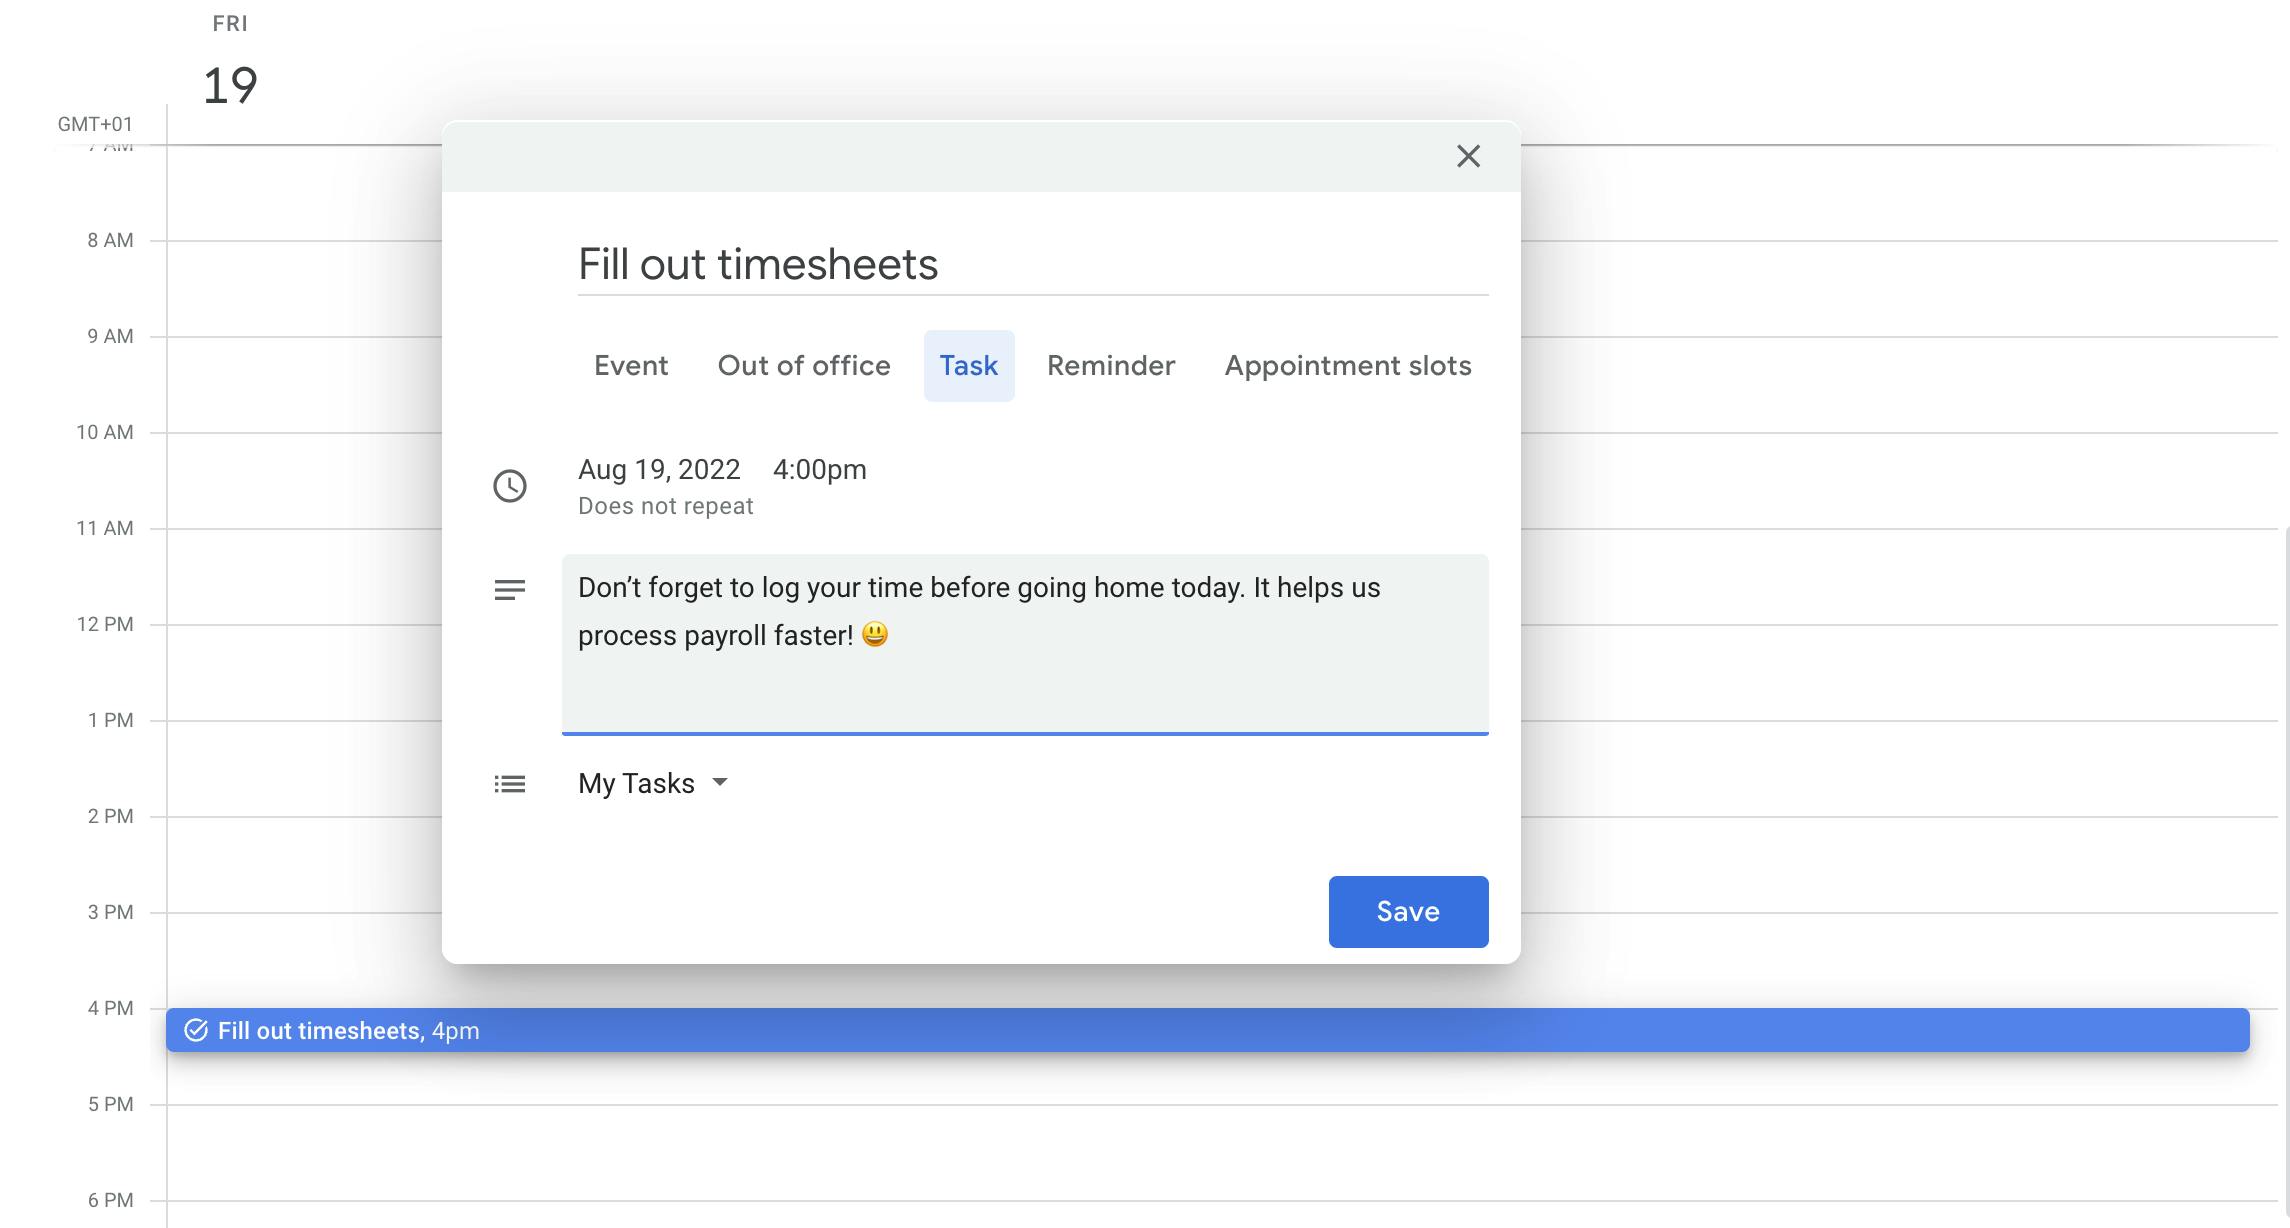 Screenshot of calendar showing task with headline "Fill out timesheets"